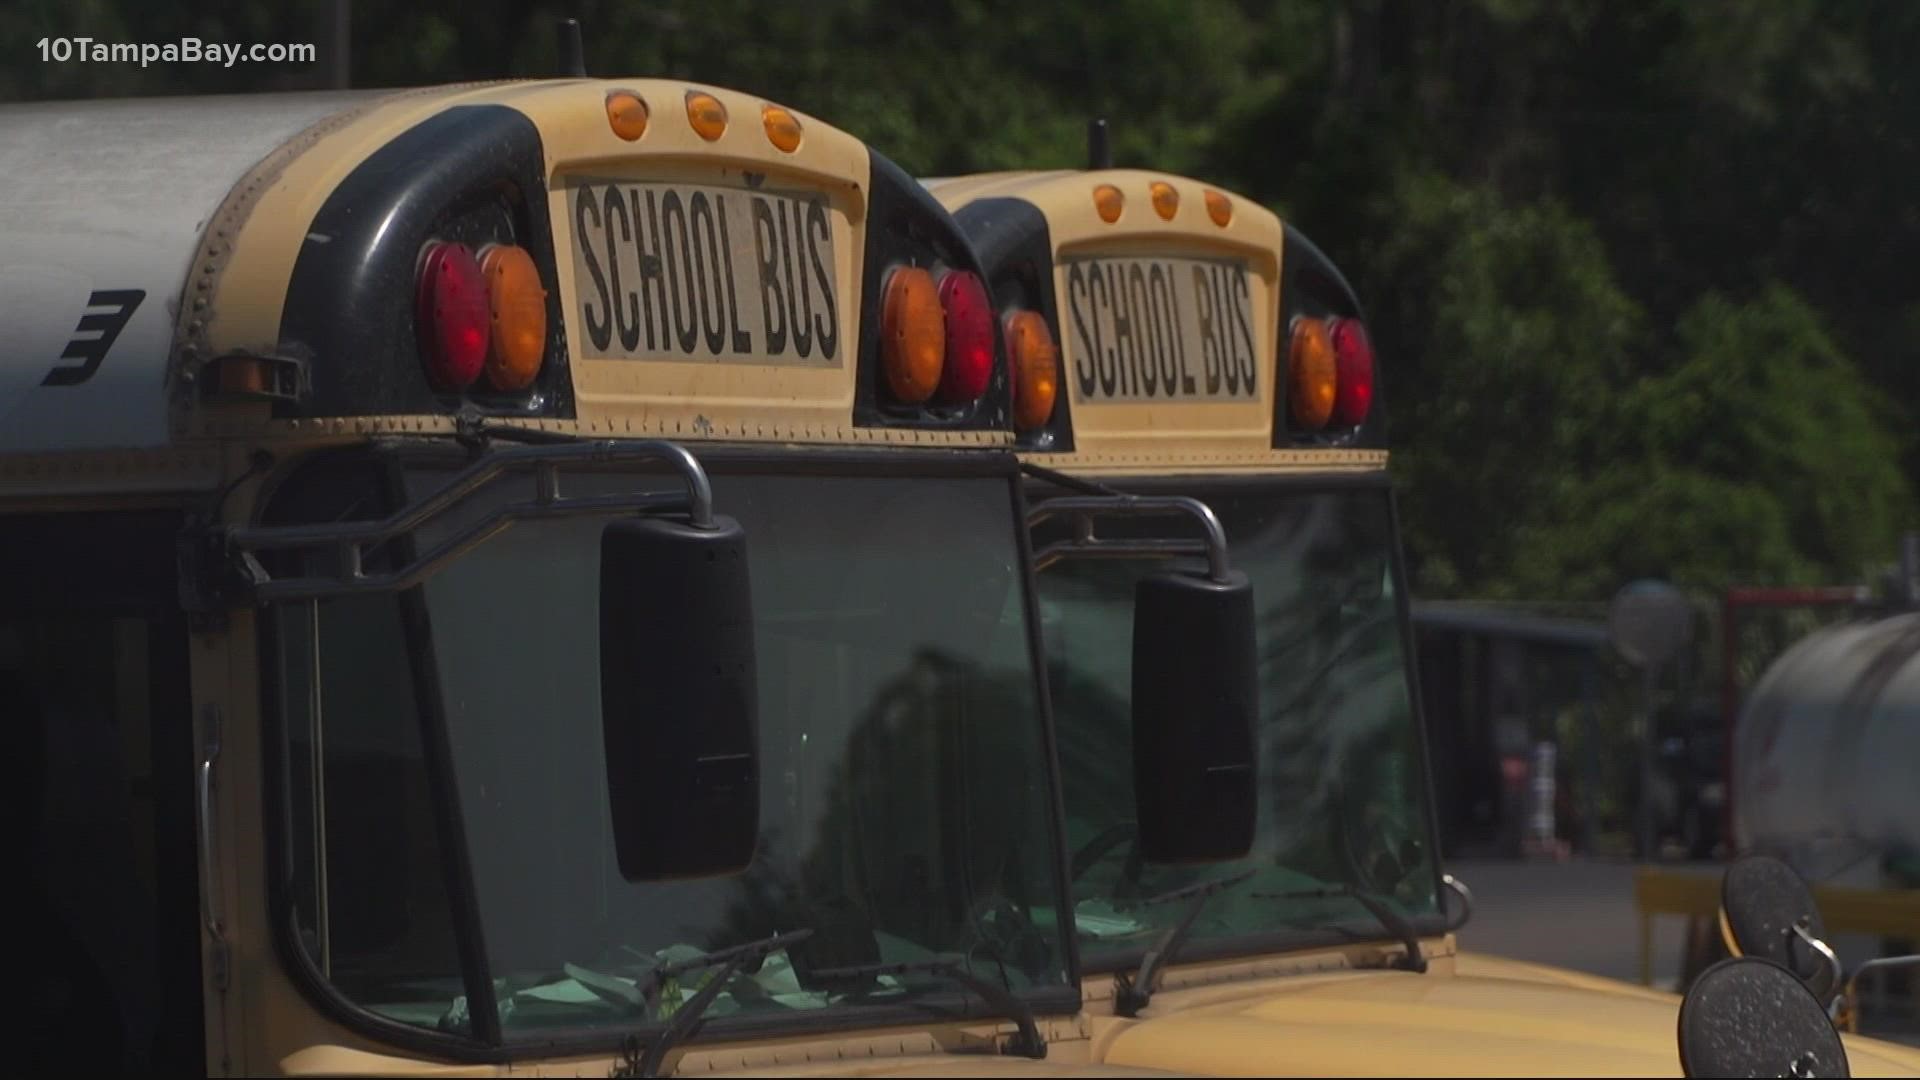 The Pasco County School District is eliminating courtesy routes, leaving around 3,000 kids to find a new way to get to school.